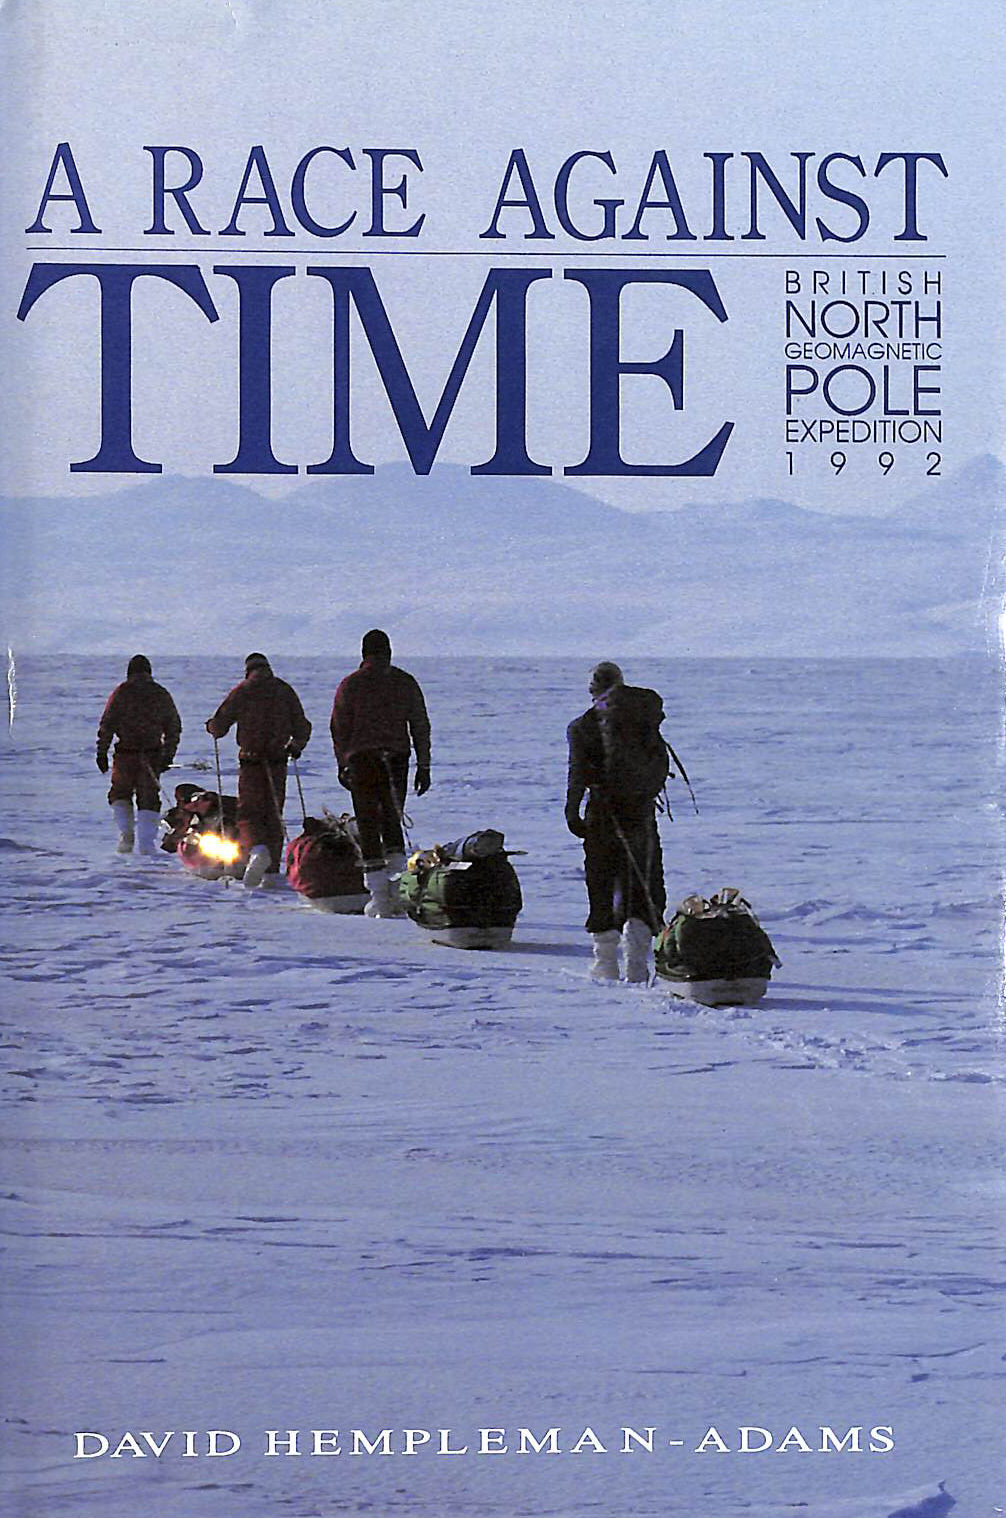 HEMPLEMAN-ADAMS, DAVID - A Race Against Time: British North Pole Geomagnetic Expedition 1992